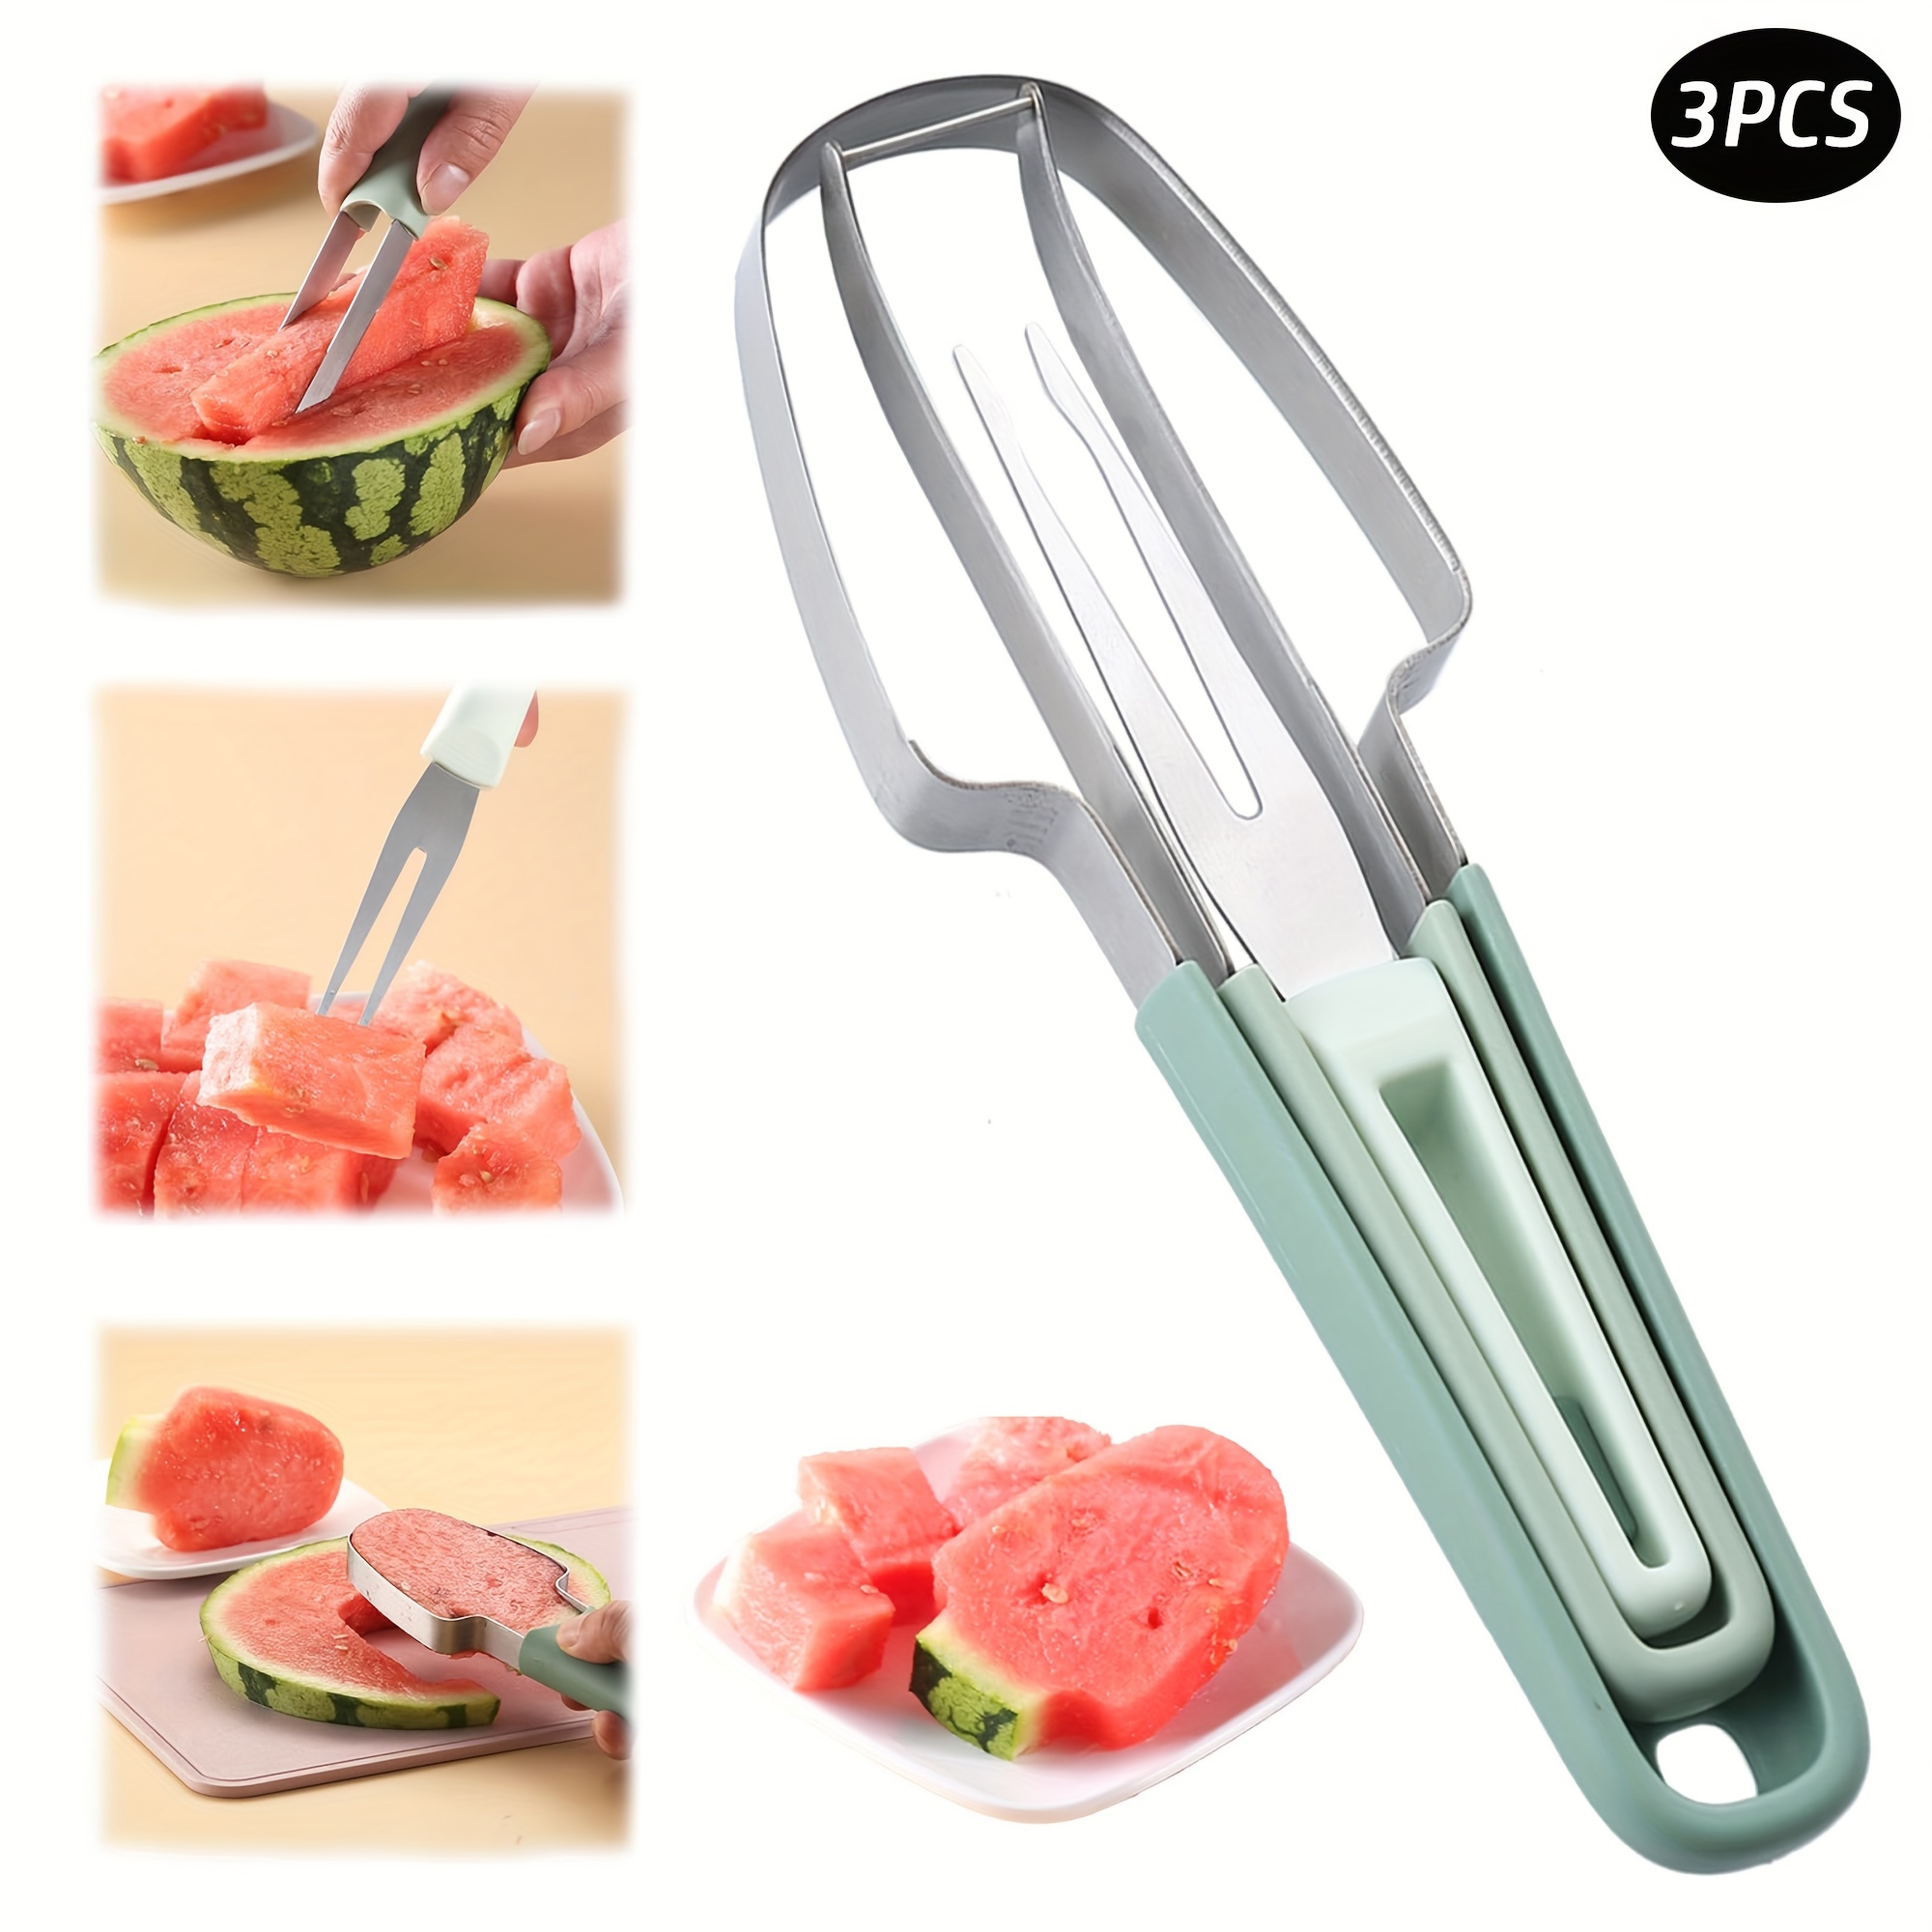 

3-piece Stainless Steel Watermelon Slicer Set - Dual-function Cutter & Fruit Clip, Multi-use Kitchen Gadget For Easy Cubes